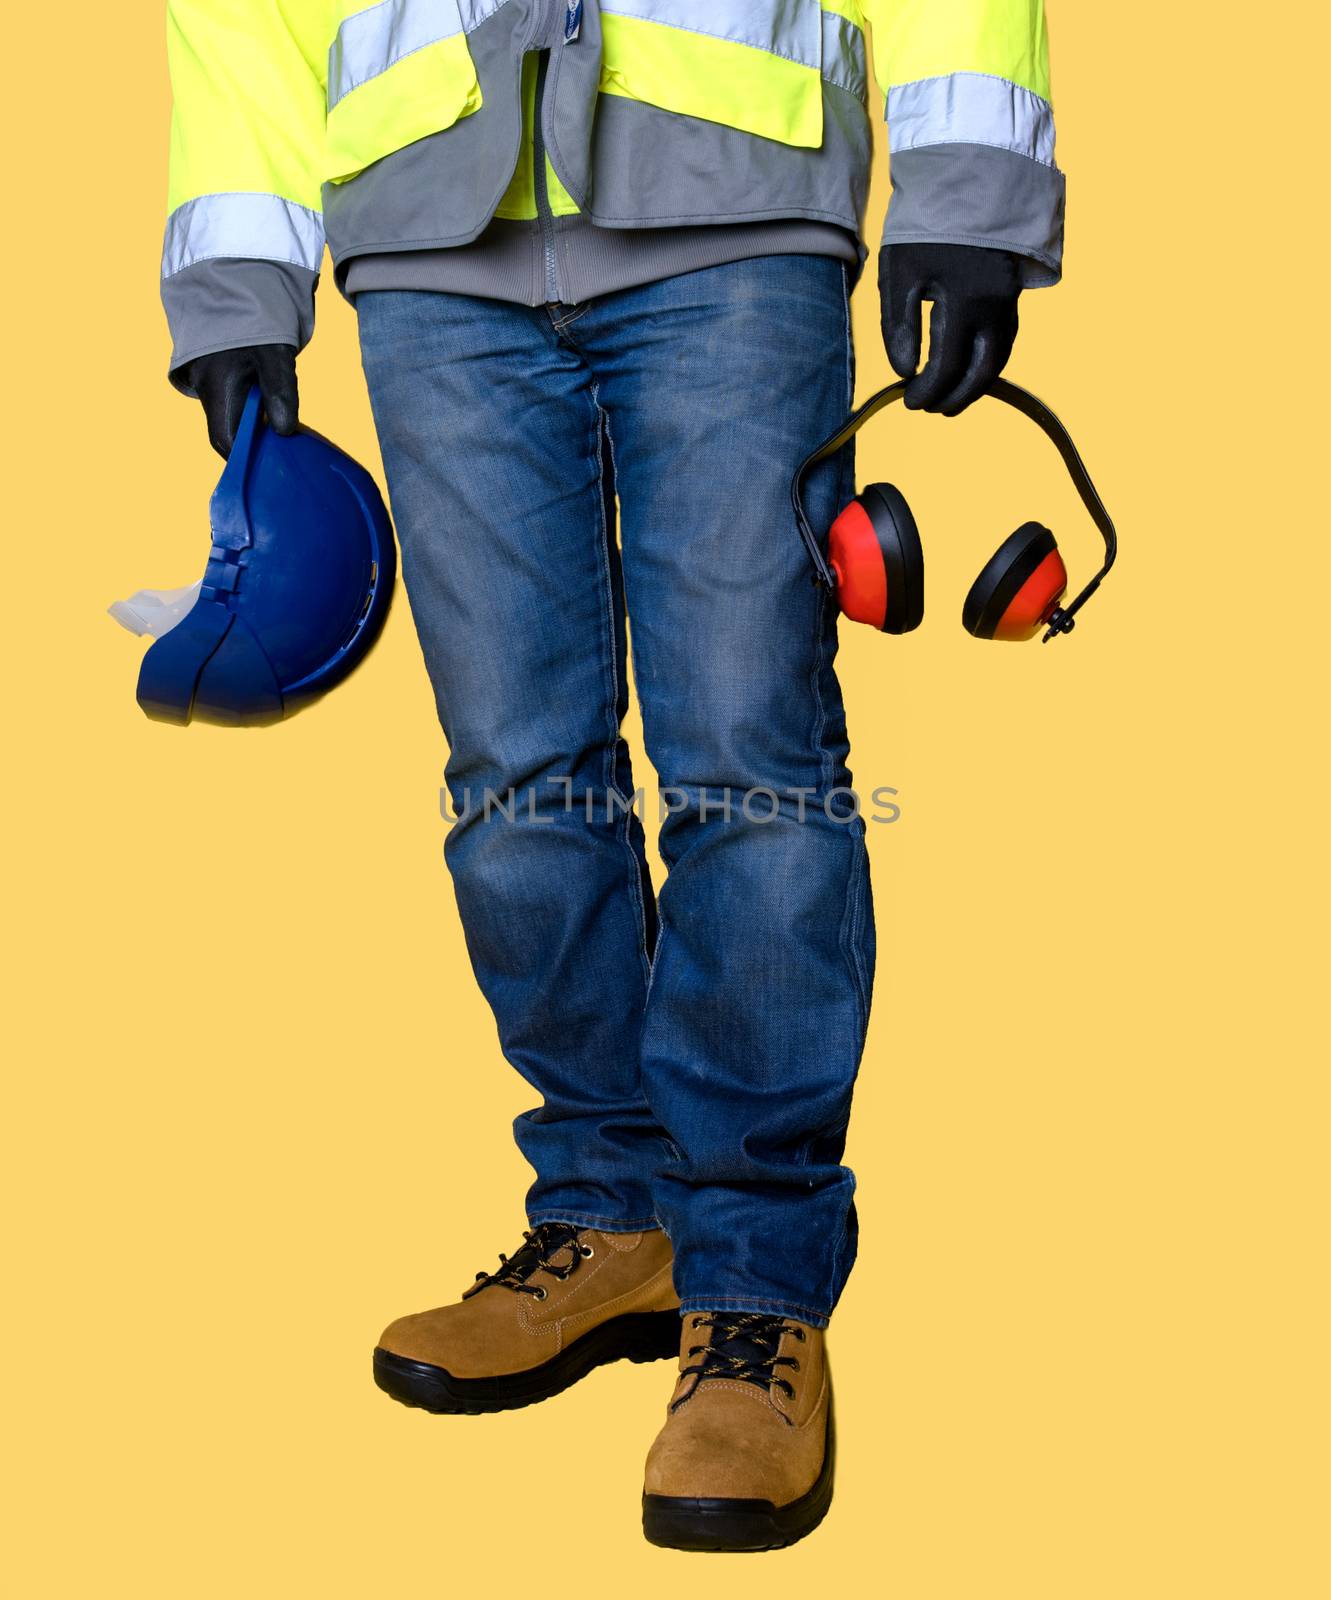 Workman wearing jeans, gloves, boots and holding protective equipment, helmet and ear defender on yellow background